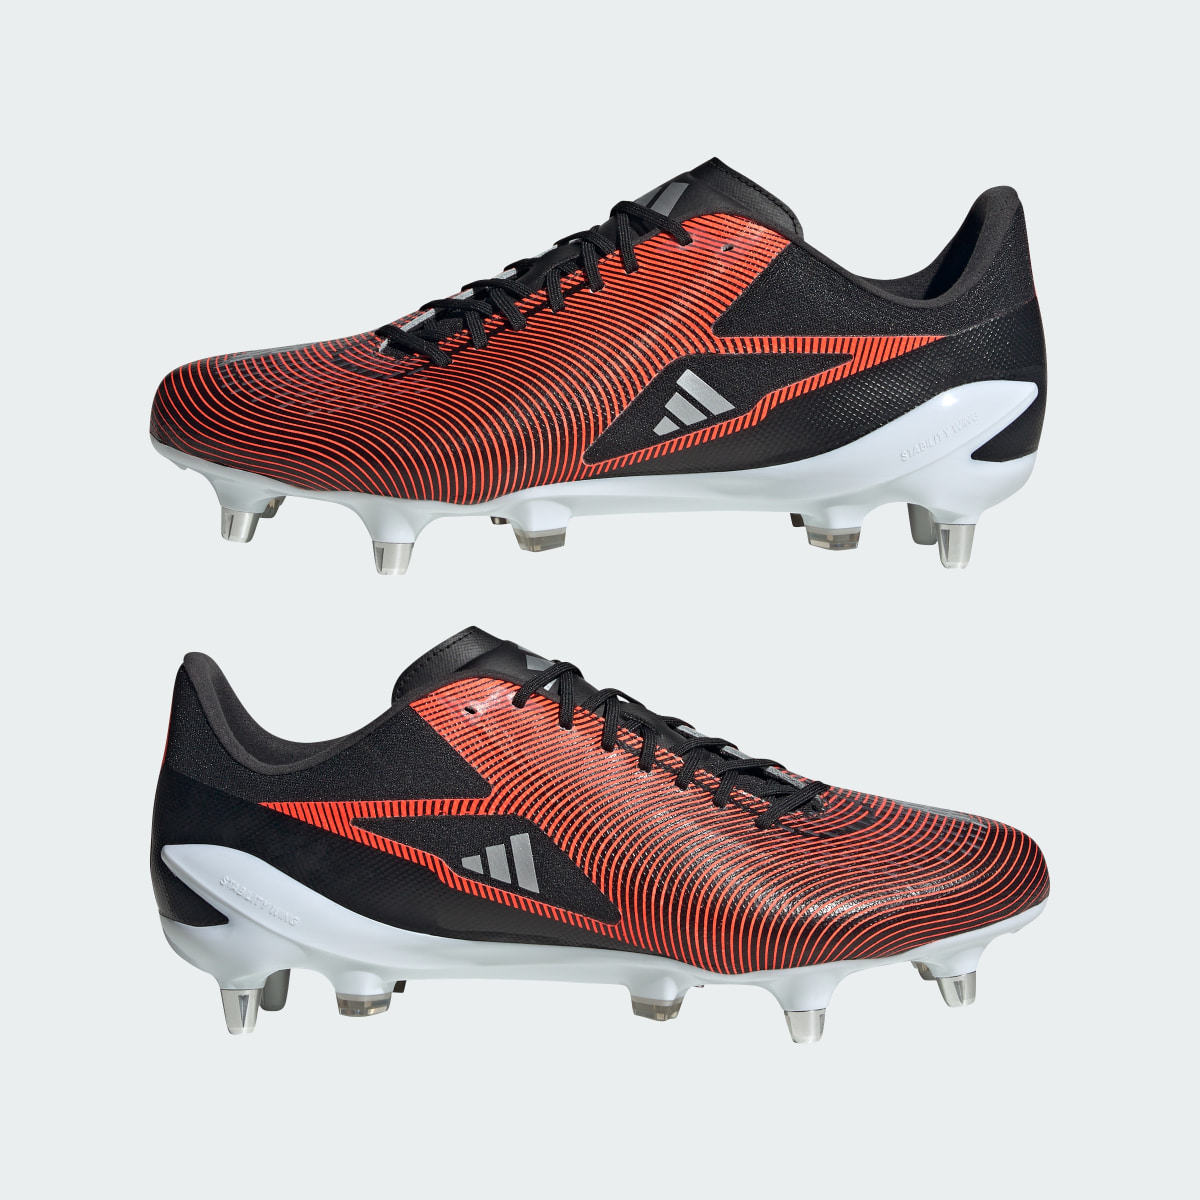 Adidas Adizero RS15 Pro Soft Ground Rugby Boots. 12